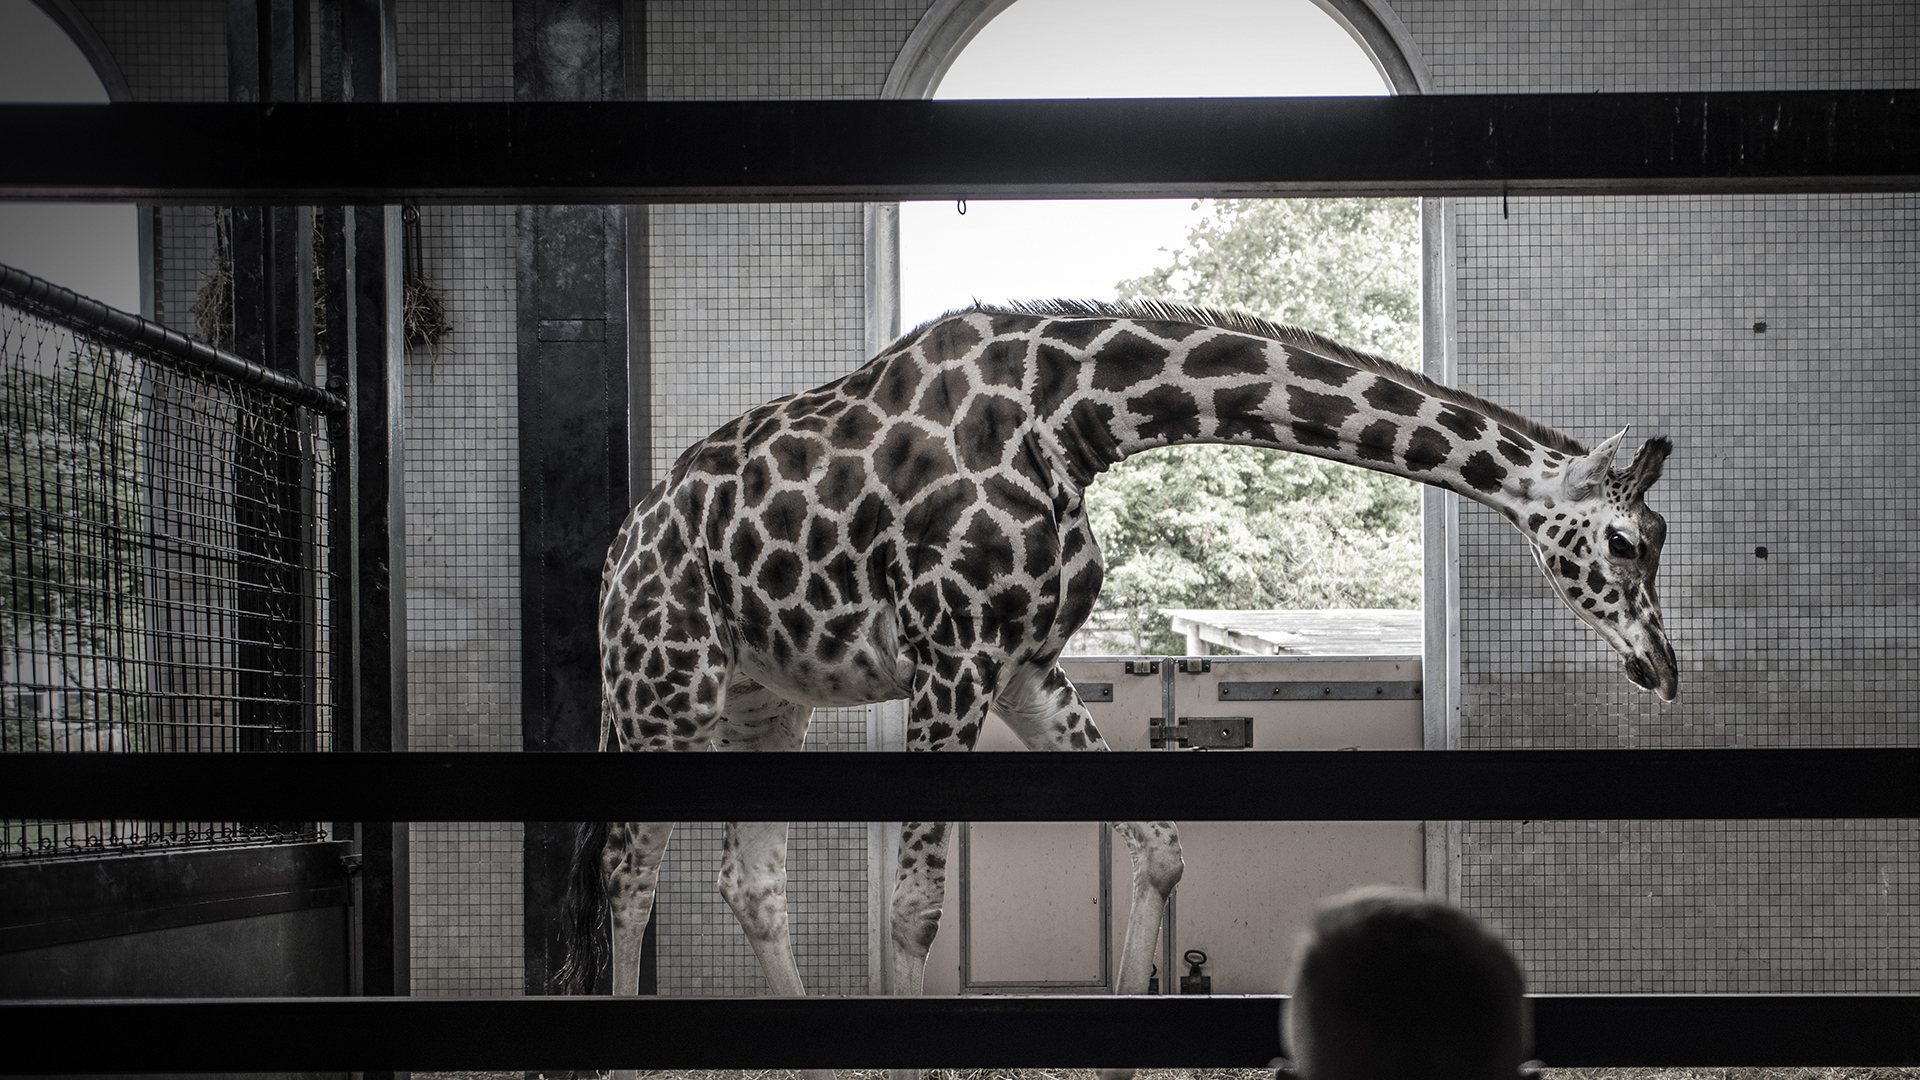 A giraffe is bending over in an indoor zoo enclosure with the photo taken through bars